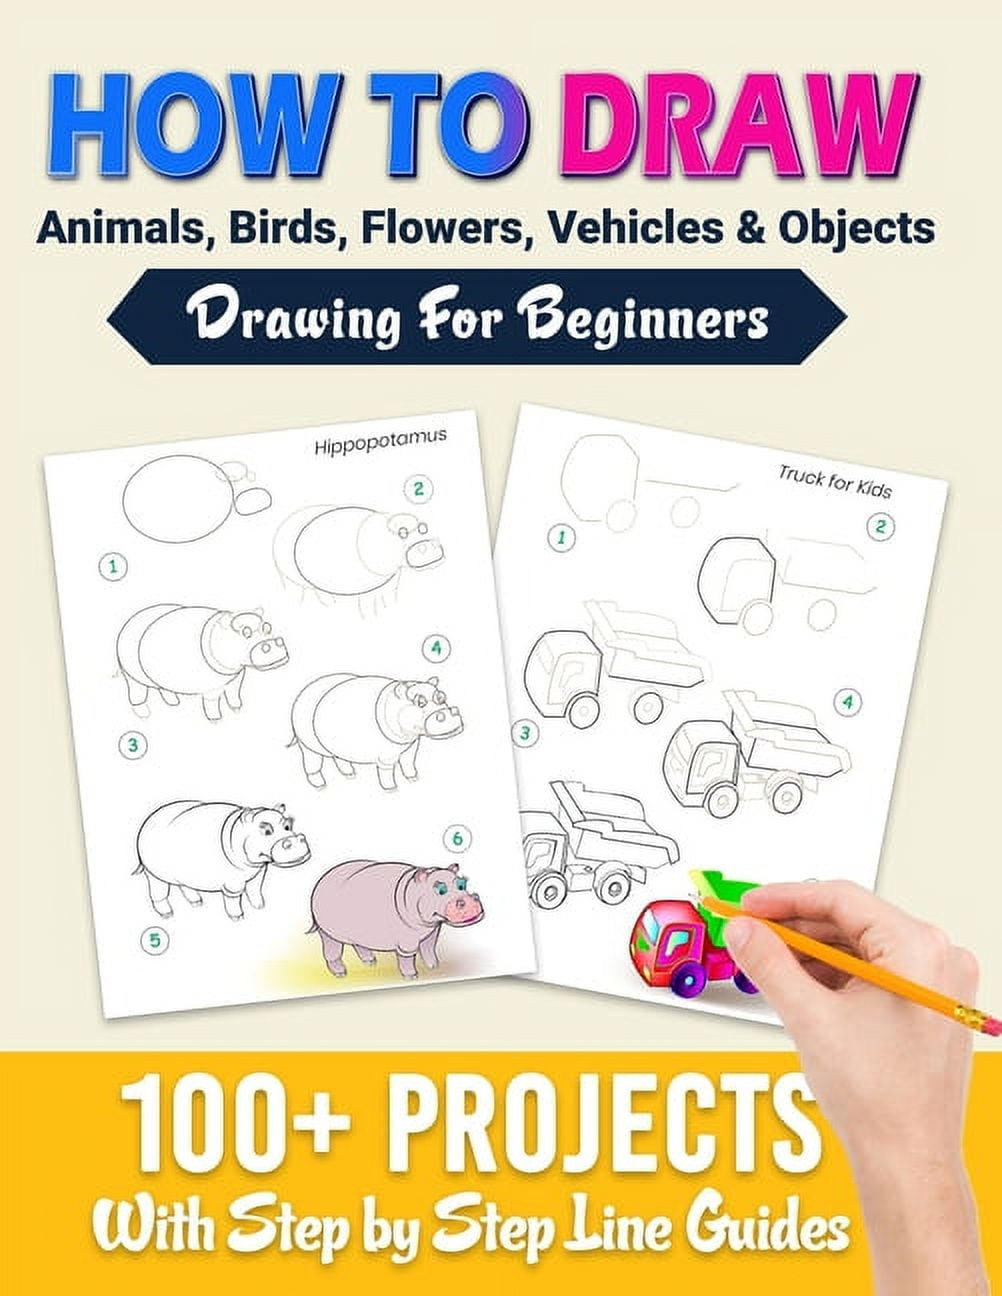 How to Draw: Best Drawing Notebook for Kids, Learn to Draw step by step,  Draw and Practice page, Special Gift for KIDS, size 8.5 x 11 and 100  pages.: How to Draw